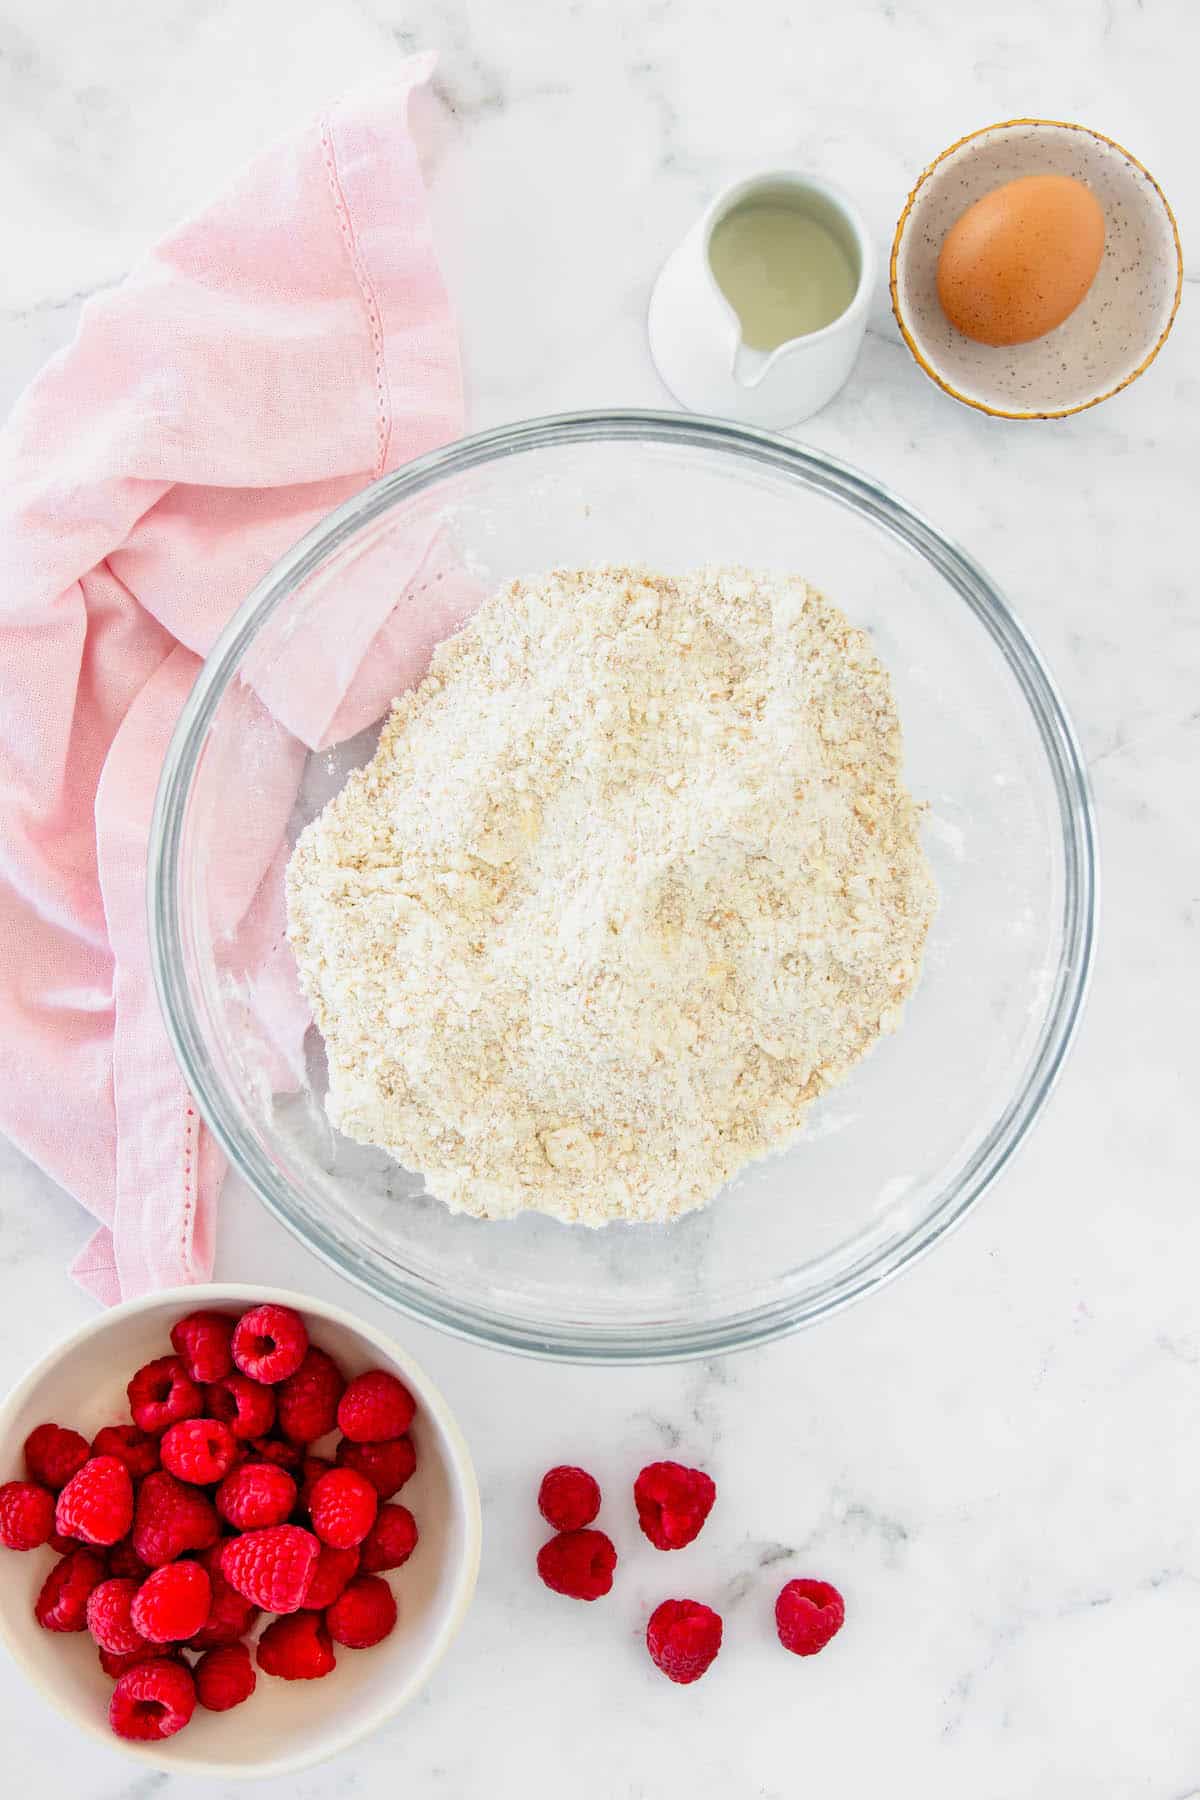 The dry ingredients for drop scones in a mixing bowl and a bowl for raspberries